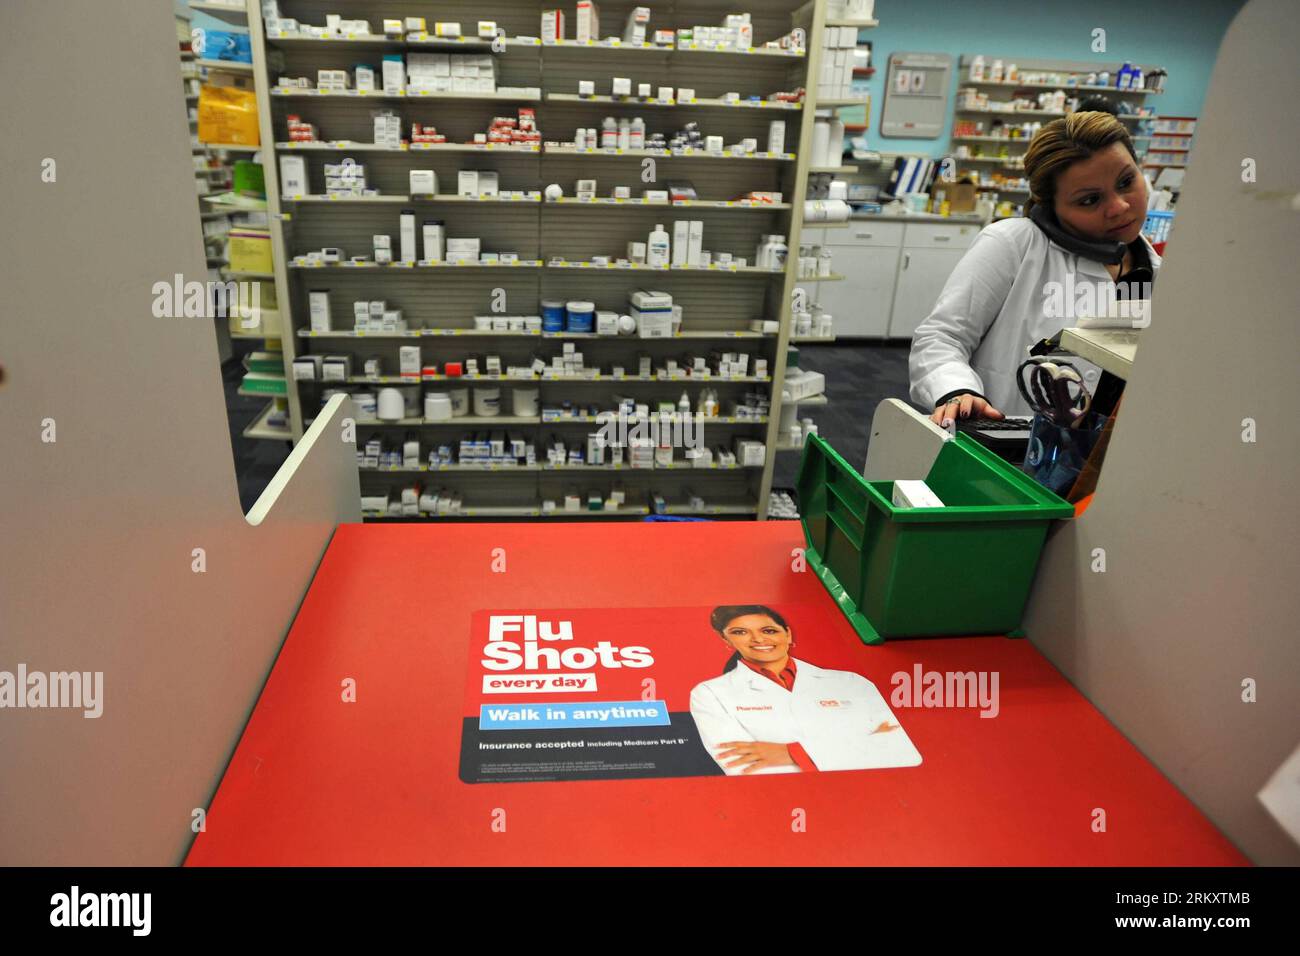 Bildnummer: 59085460  Datum: 15.01.2013  Copyright: imago/Xinhua (130115) -- NEW YORK, Jan. 15, 2013 (Xinhua) -- A staff member works at a CVS pharmacy store in New York, the United States, Jan. 15, 2013. As of Sunday, more than 20,000 cases of influenza have been reported in New York State for this season, far more than the 4, 404 cases that were reported in the last season. (Xinhua/Wang Lei) US-NEW YORK-FLU-OUTBREARK PUBLICATIONxNOTxINxCHN Gesellschaft Grippe Grippewelle Epidemie Gesundheit Apotheke Impfung Medikament xas x0x 2013 quer premiumd      59085460 Date 15 01 2013 Copyright Imago X Stock Photo